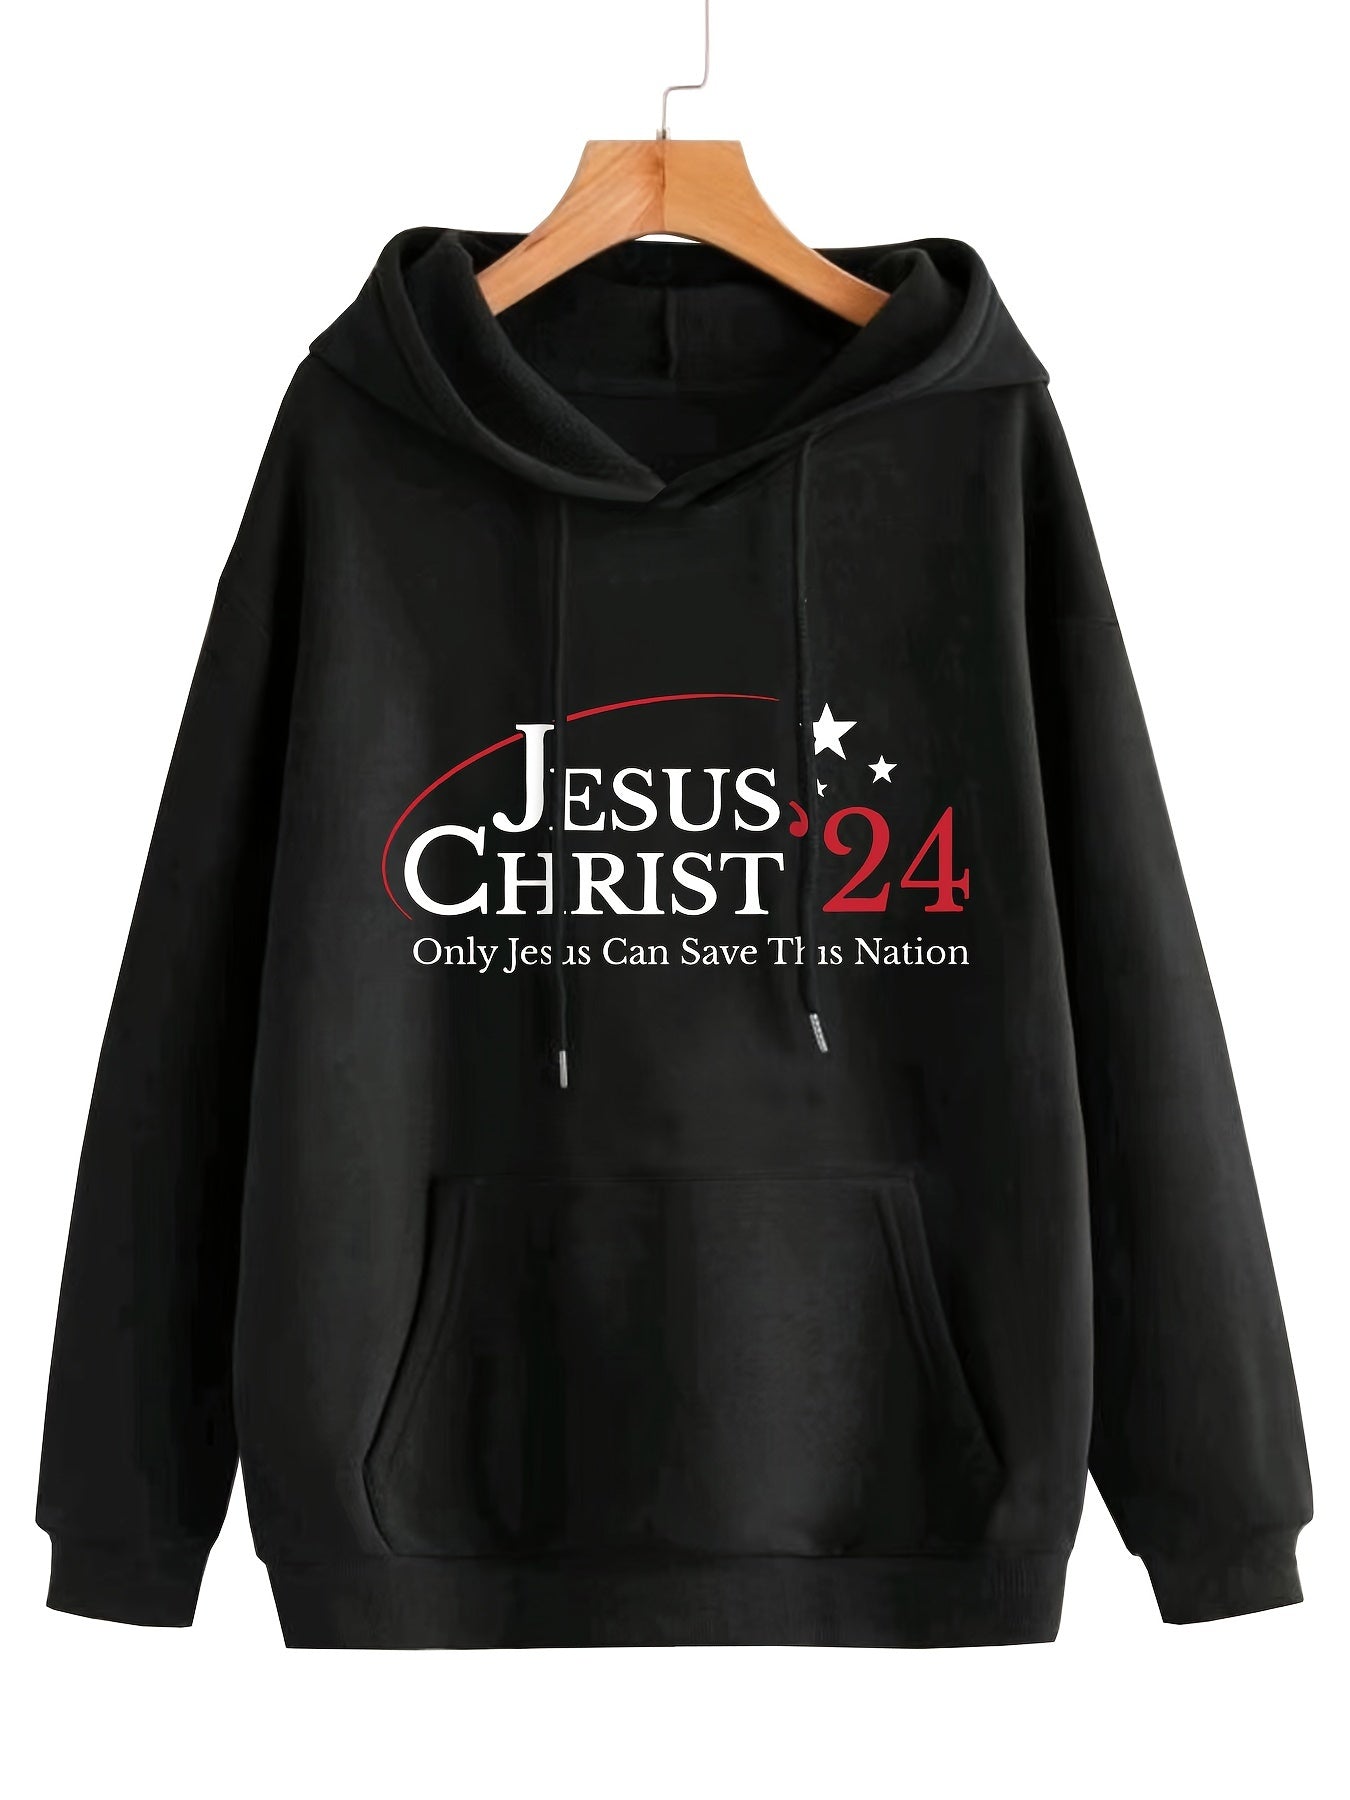 Jesus Christ '24: Only Jesus Can Save This Nation Women's Christian Pullover Hooded Sweatshirts claimedbygoddesigns